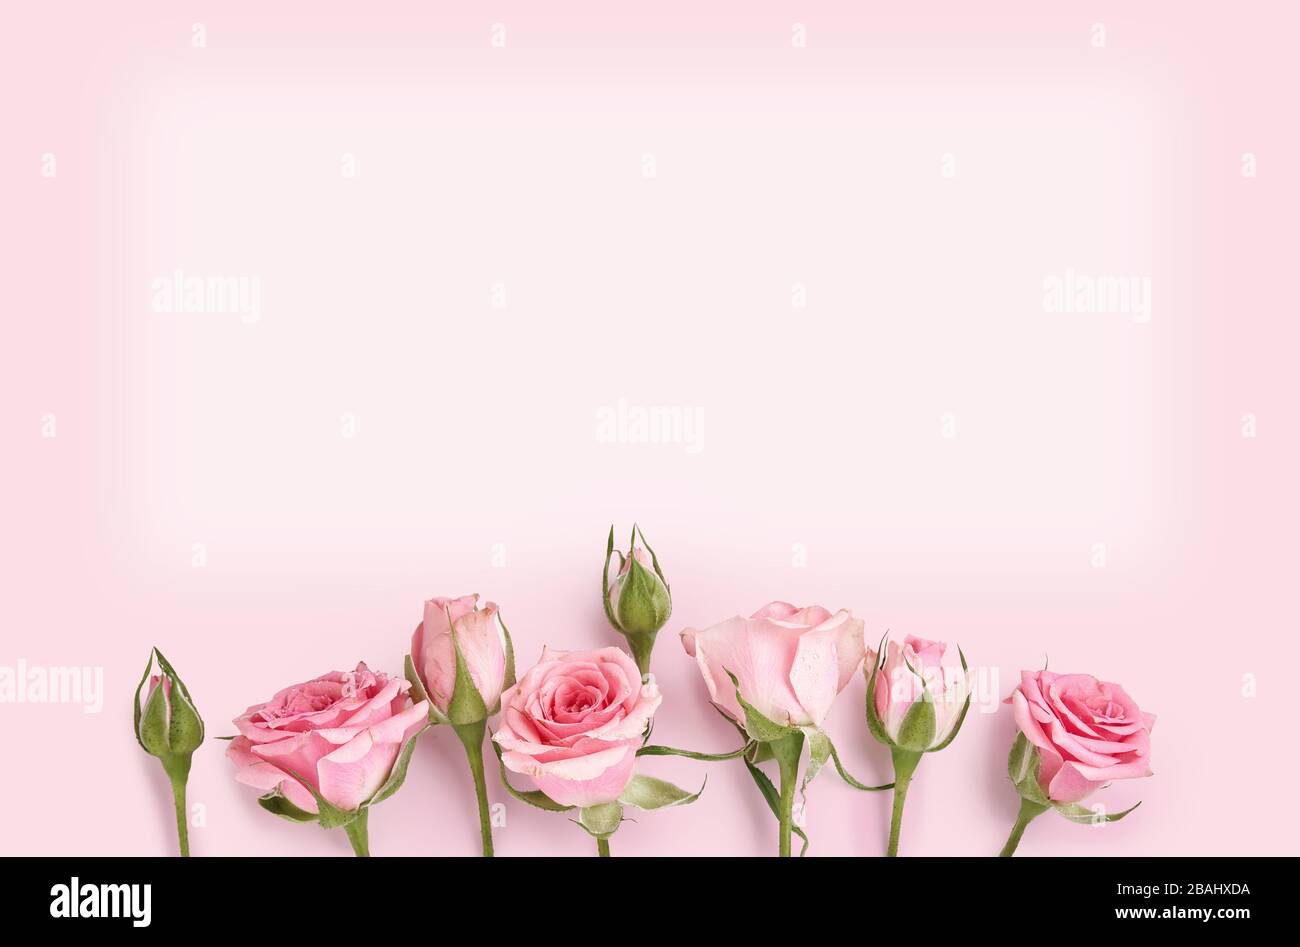 Pink roses on rose color background. Holiday flower background for invitation, banner Stock Photo